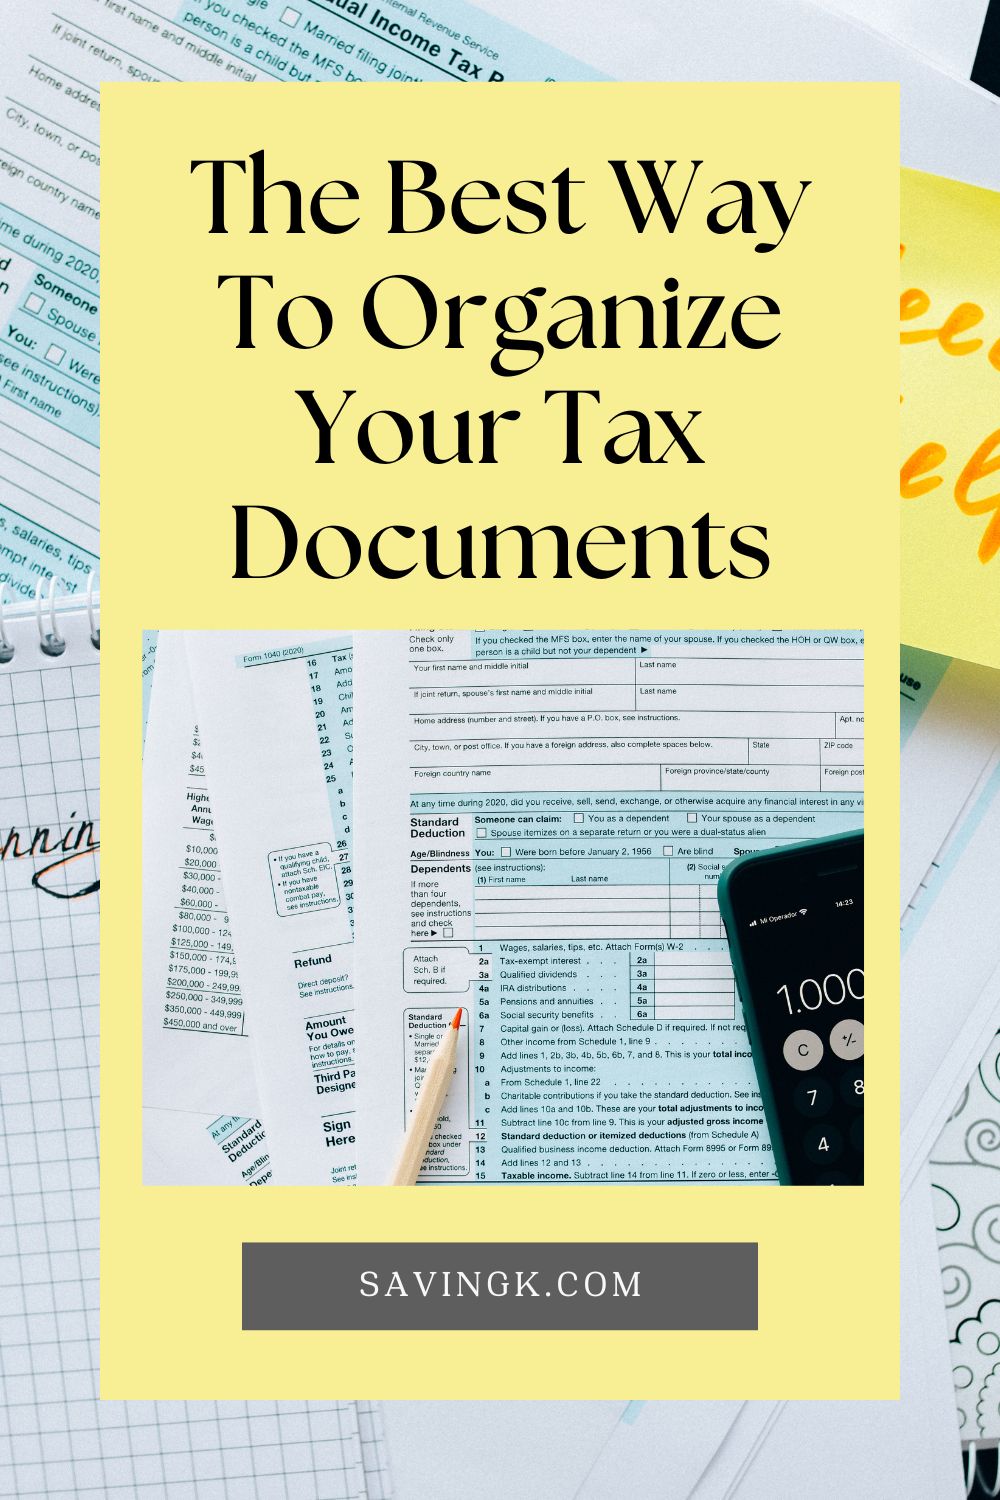 The Best Way To Organize Your Tax Documents